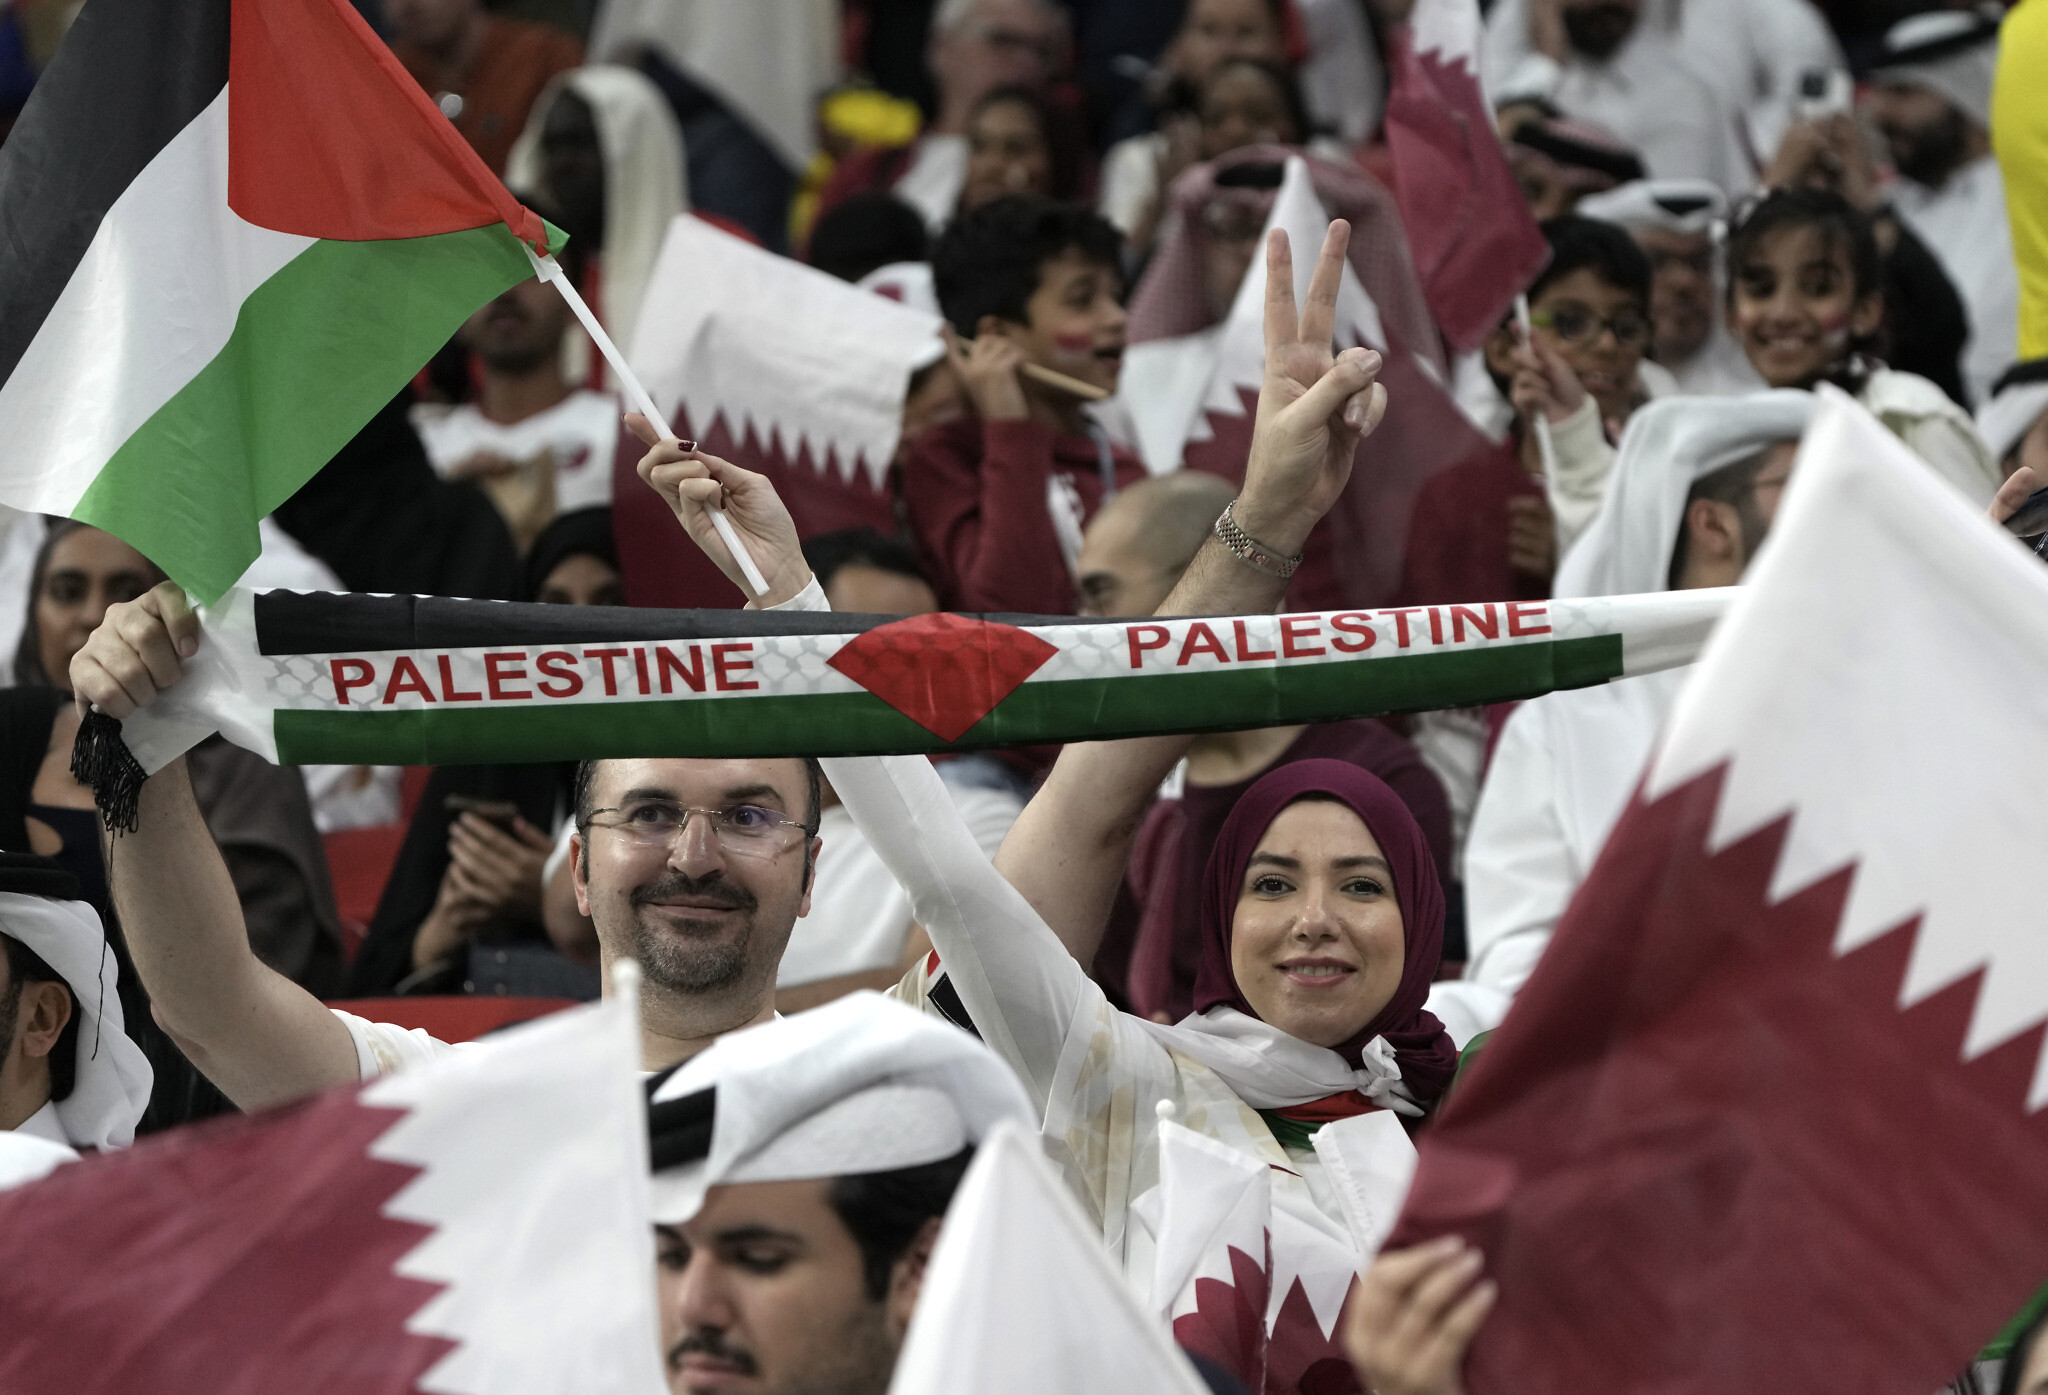 Faraway friction with Palestinians follows some Israelis to World Cup